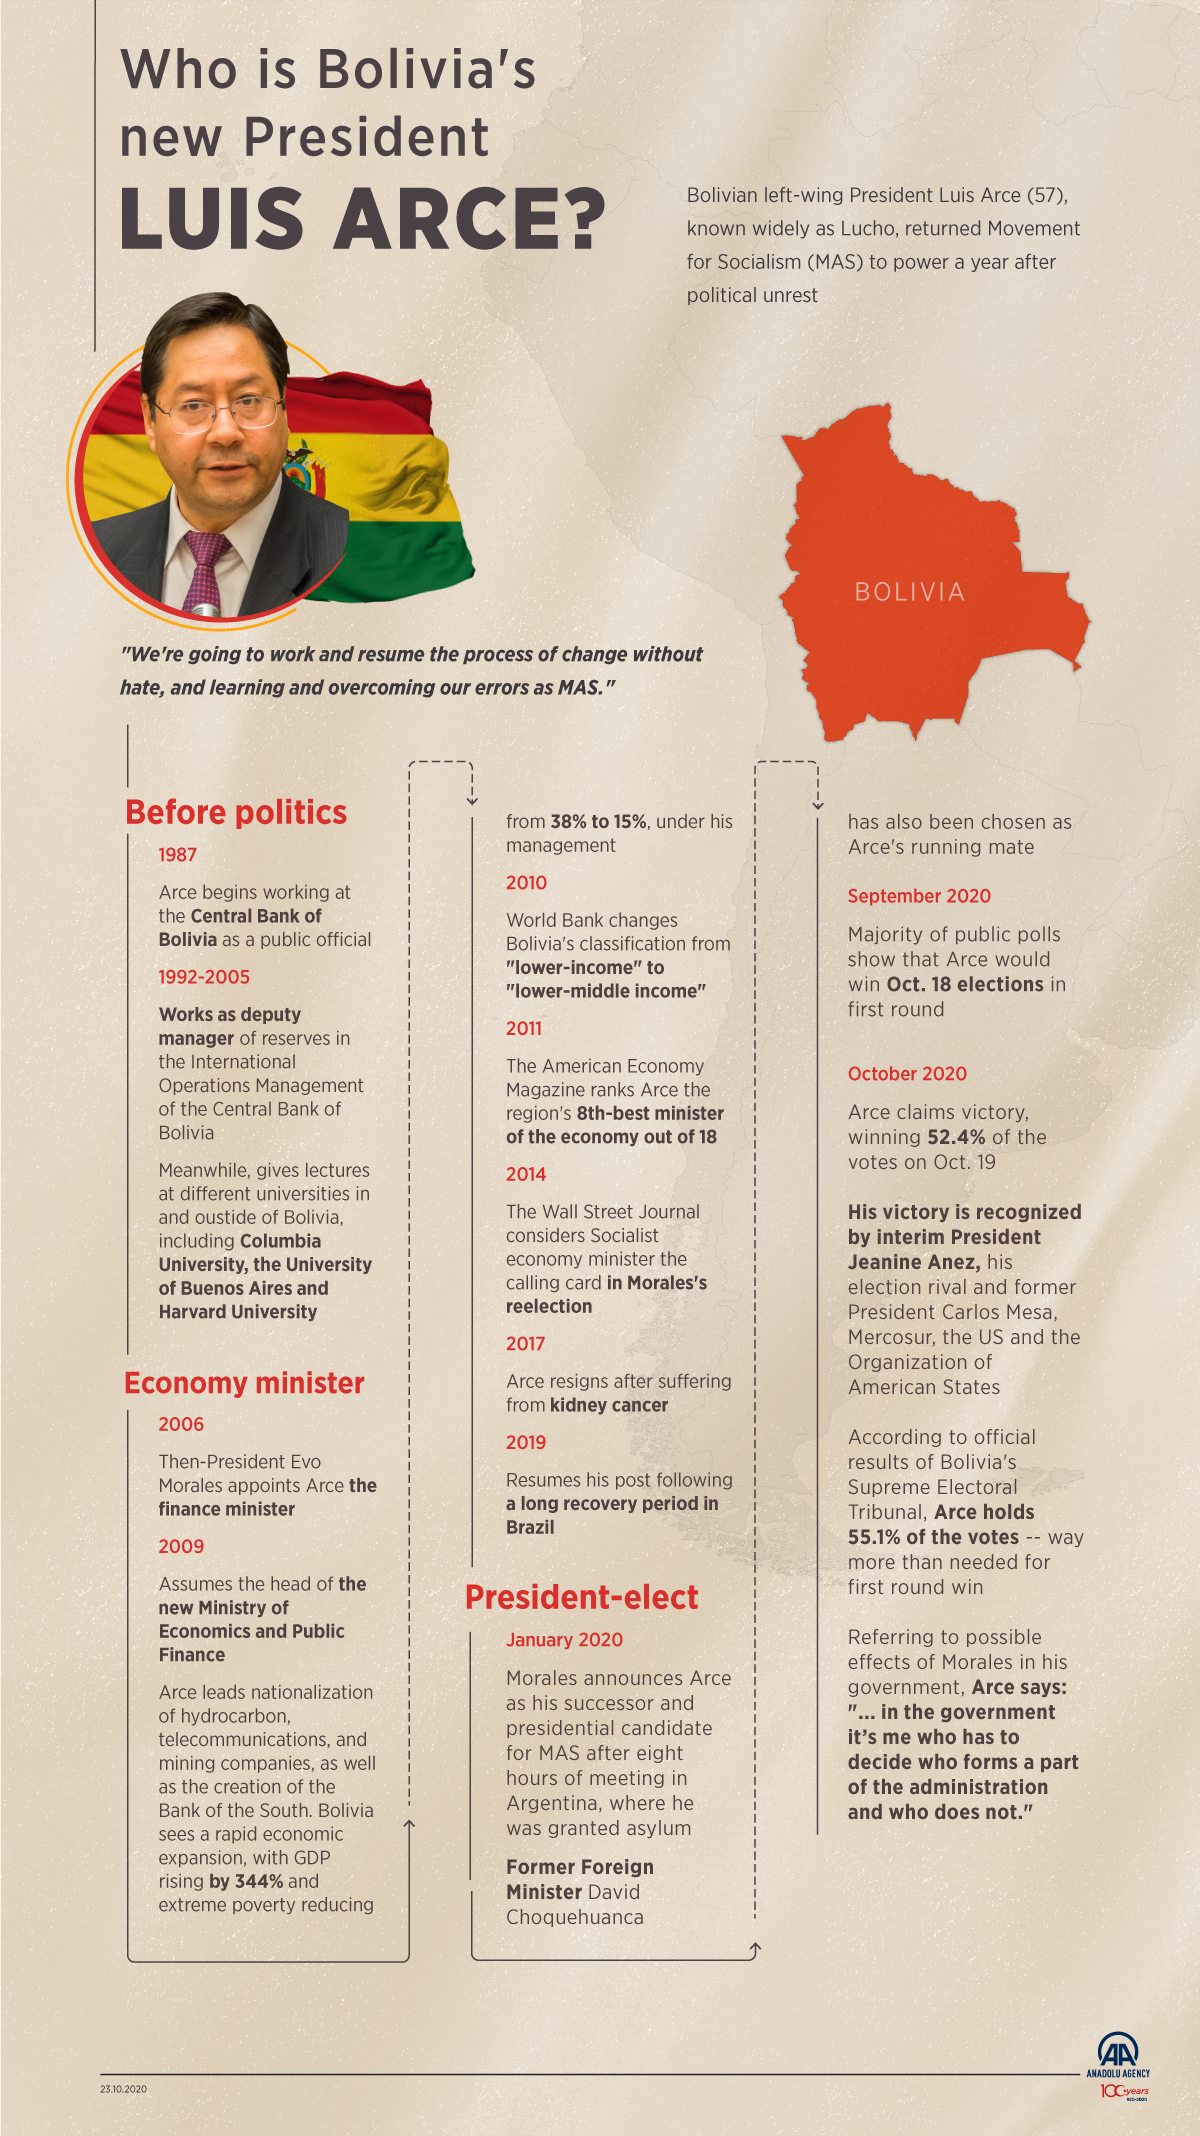 Who is Bolivia's new President Luis Arce?